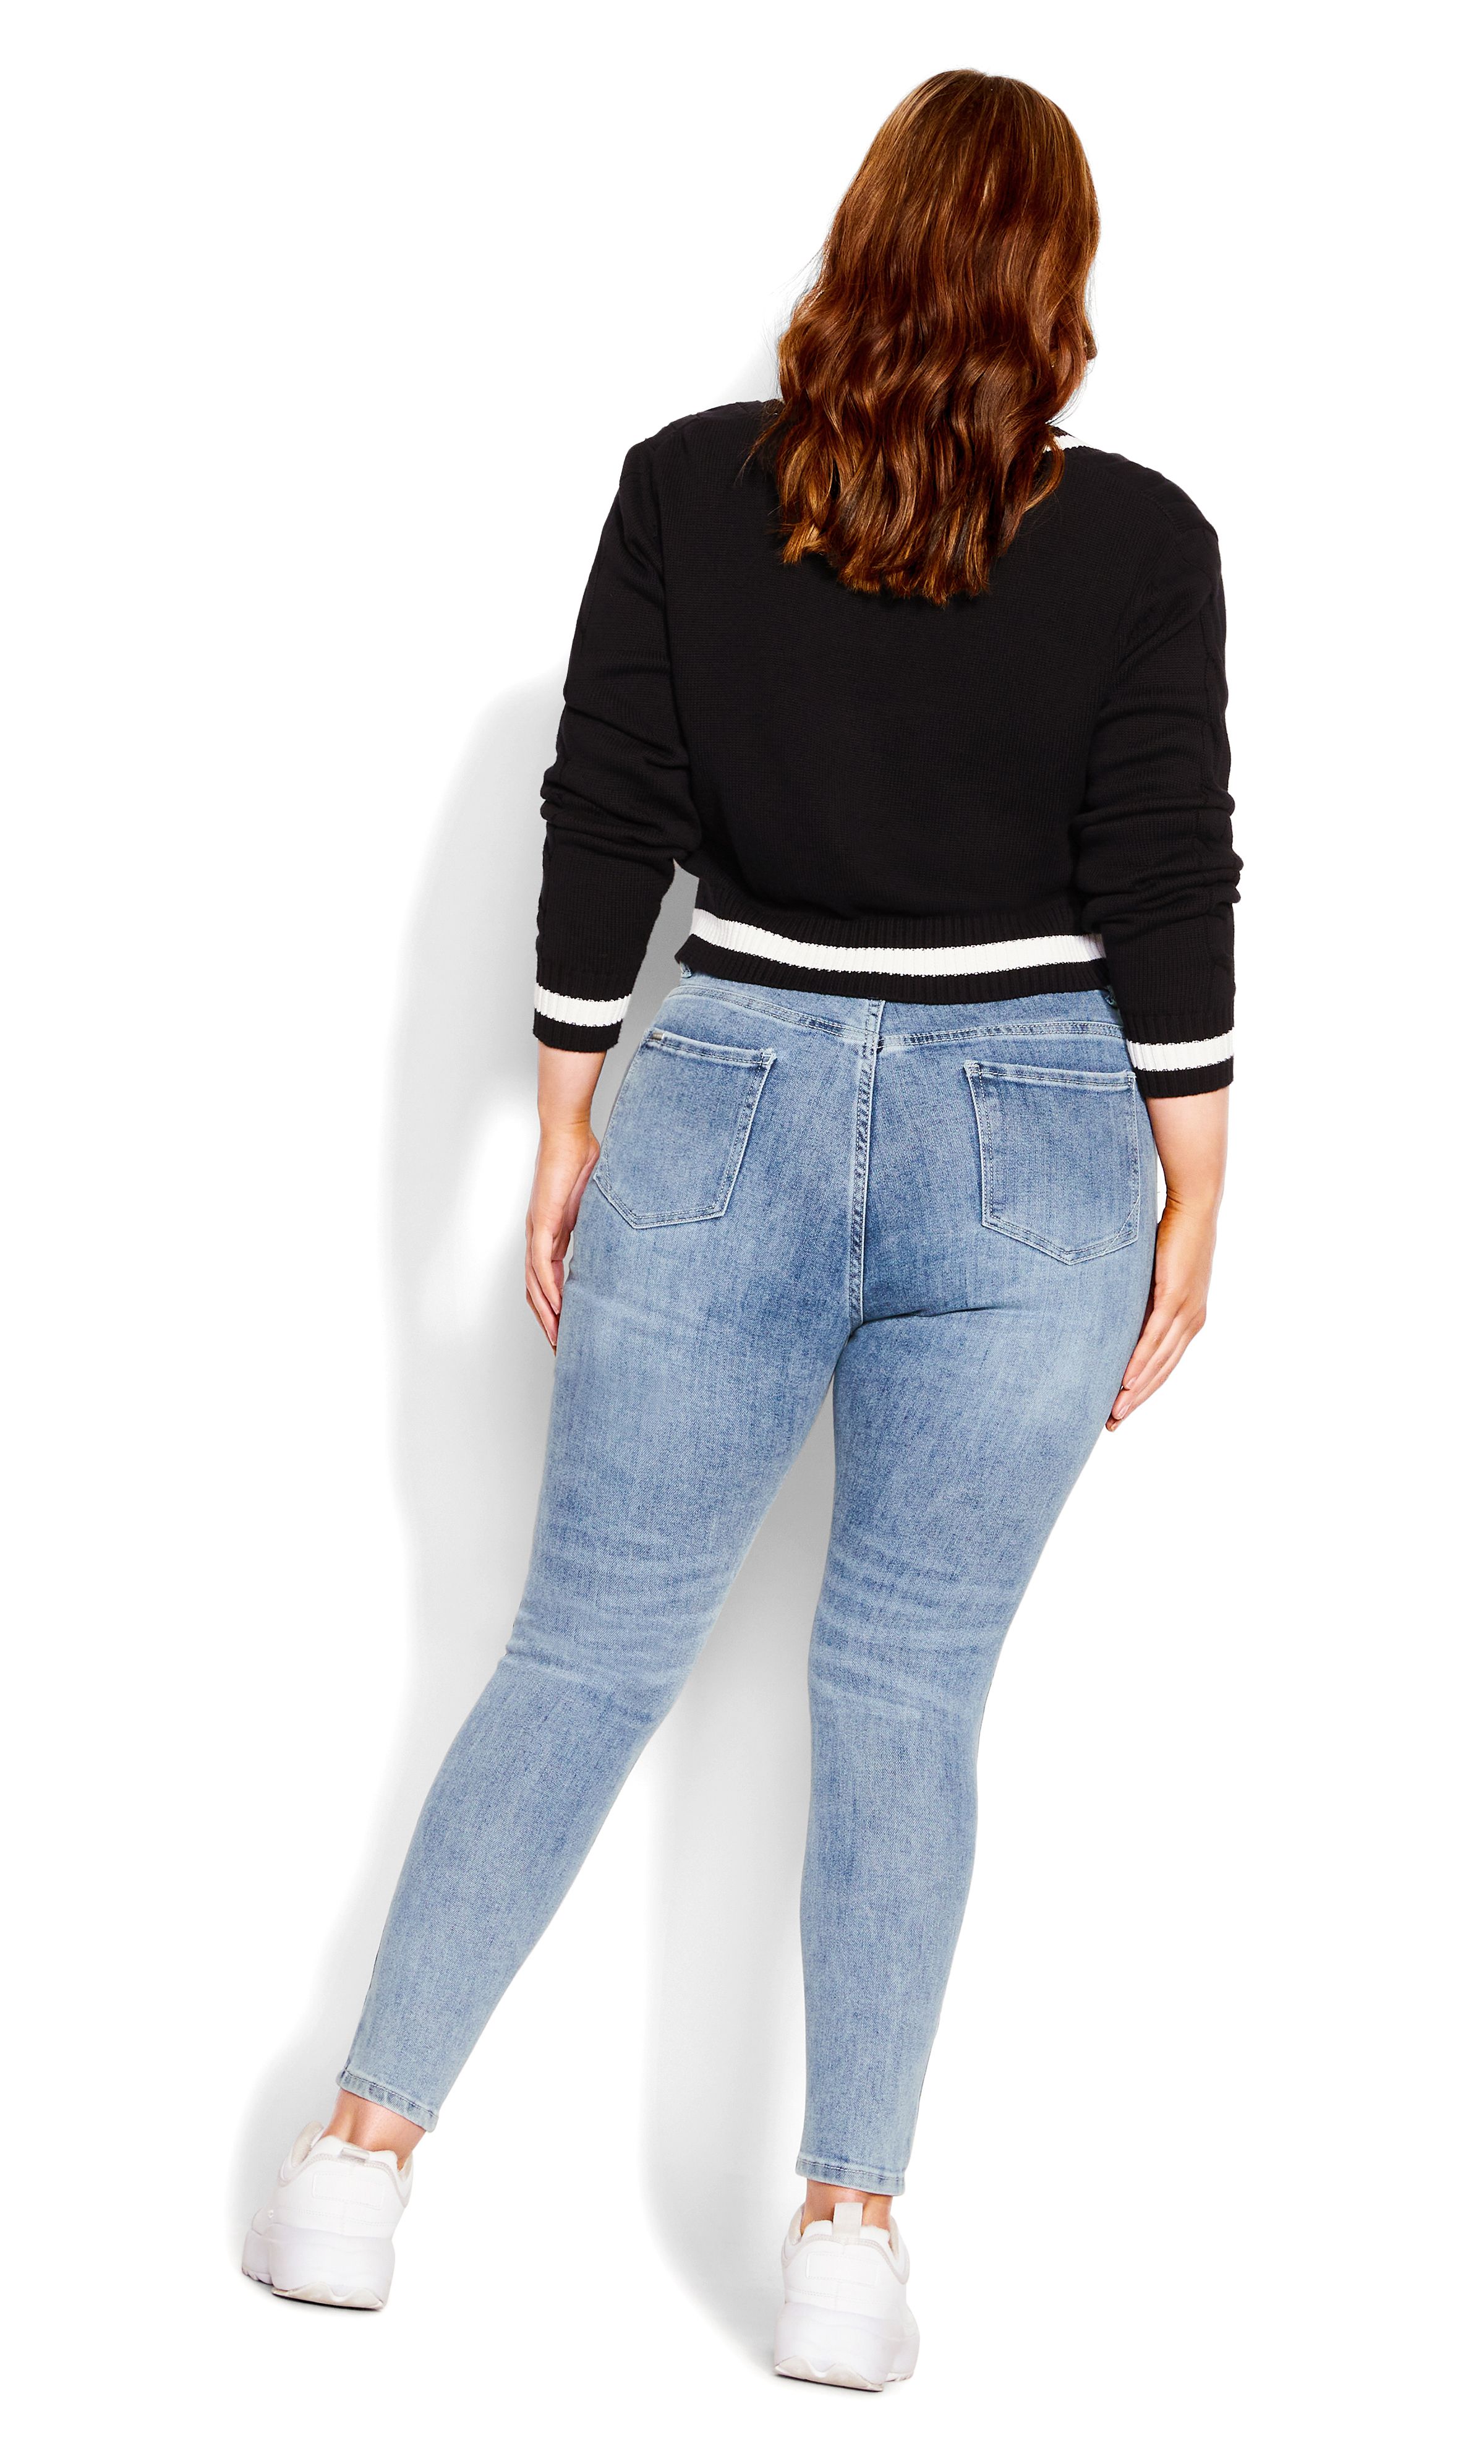 Keep chic and sassy this season in our Asha Sassy Rips Jean! Offered in our Asha fit, these jeans are perfect for an apple body shape, featuring a flattering high rise cut, svelte skinny leg and killer rip detail. Key Features Include: - Asha: the perfect fit for an apple body shape - High rise - Double button & zip fly closure - Belt-looped waistline - 5-pocket denim styling - Stretch cotton blend fabrication - Distressed detail - Skinny leg - High denim fibre retention to maintain shape - Signature Chic Denim hardware throughout zips, buttons and rivets - Full length Rock a biker-chic aesthetic with a vintage graphic tee, leather jacket and trendy combat boots!